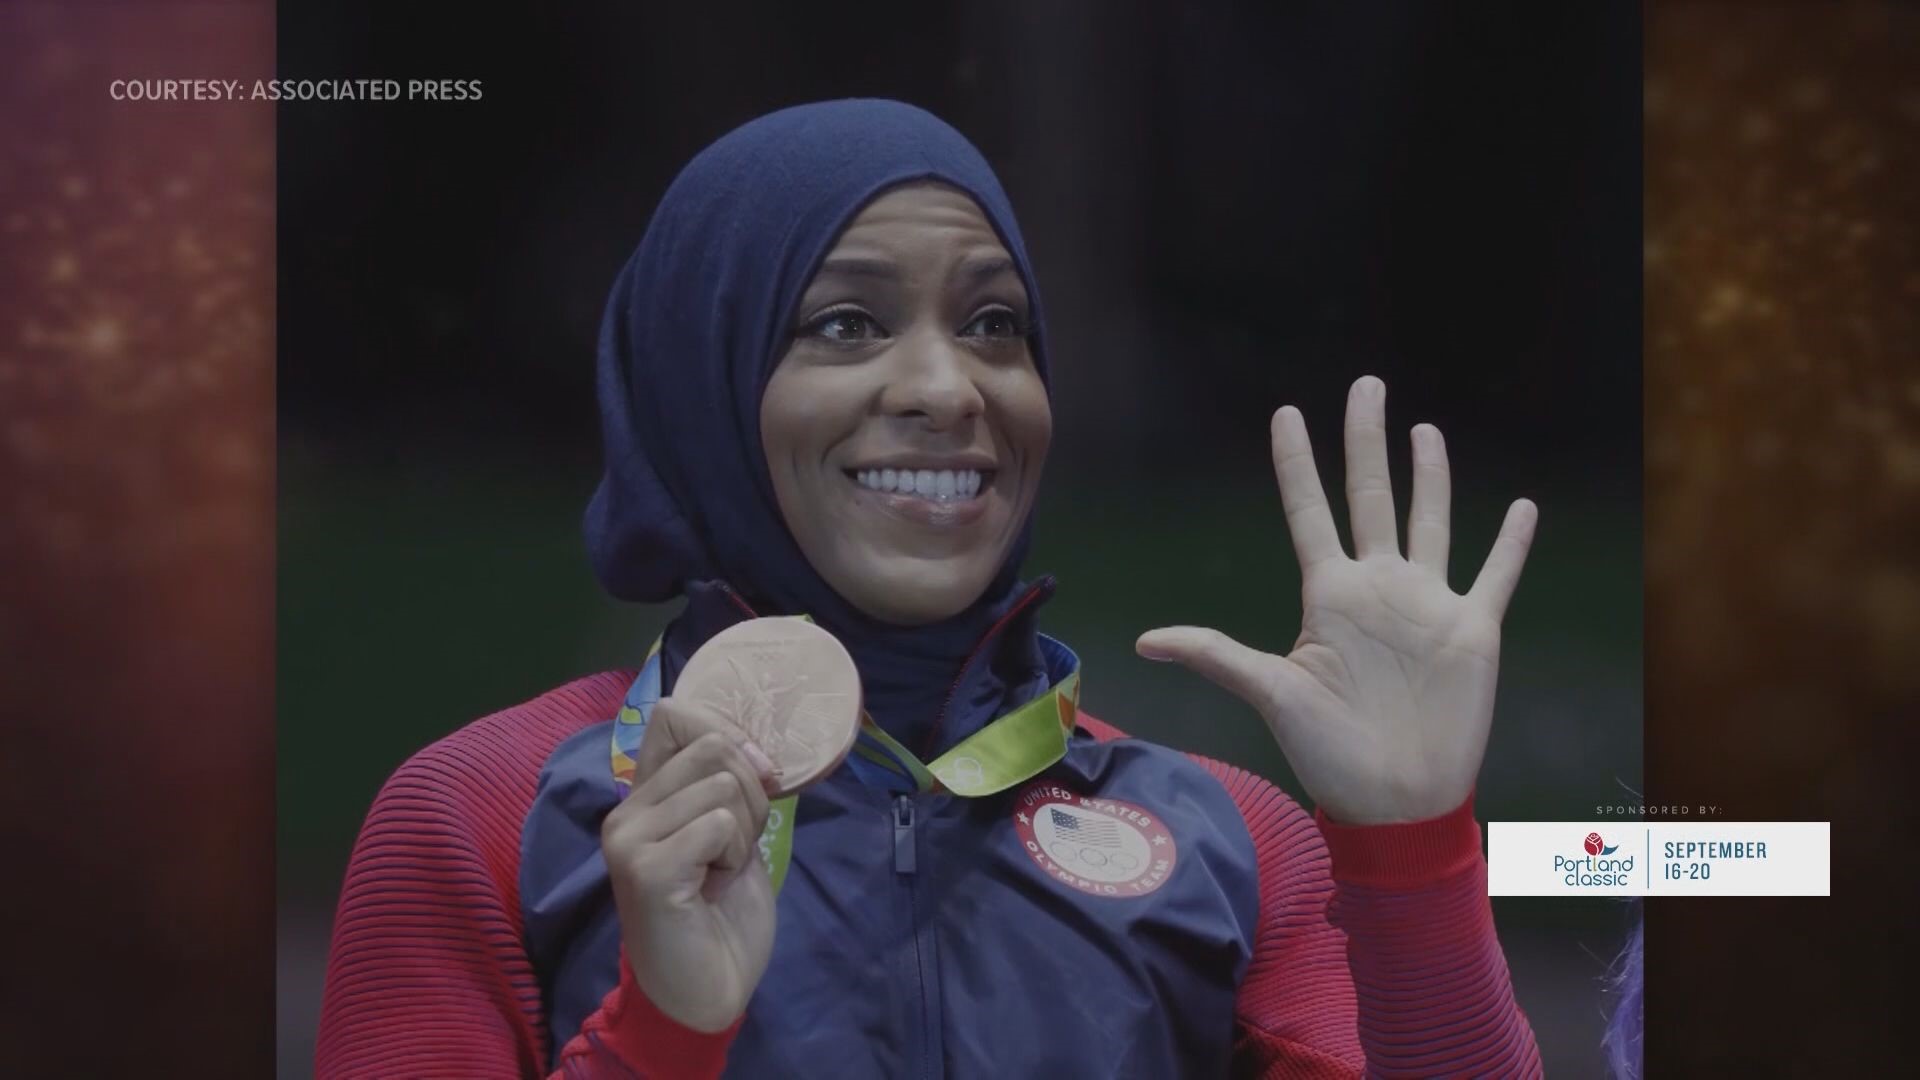 The duke graduate won bronze in Rio 2016 and became the first U.S. athlete to wear a hijab at the games.